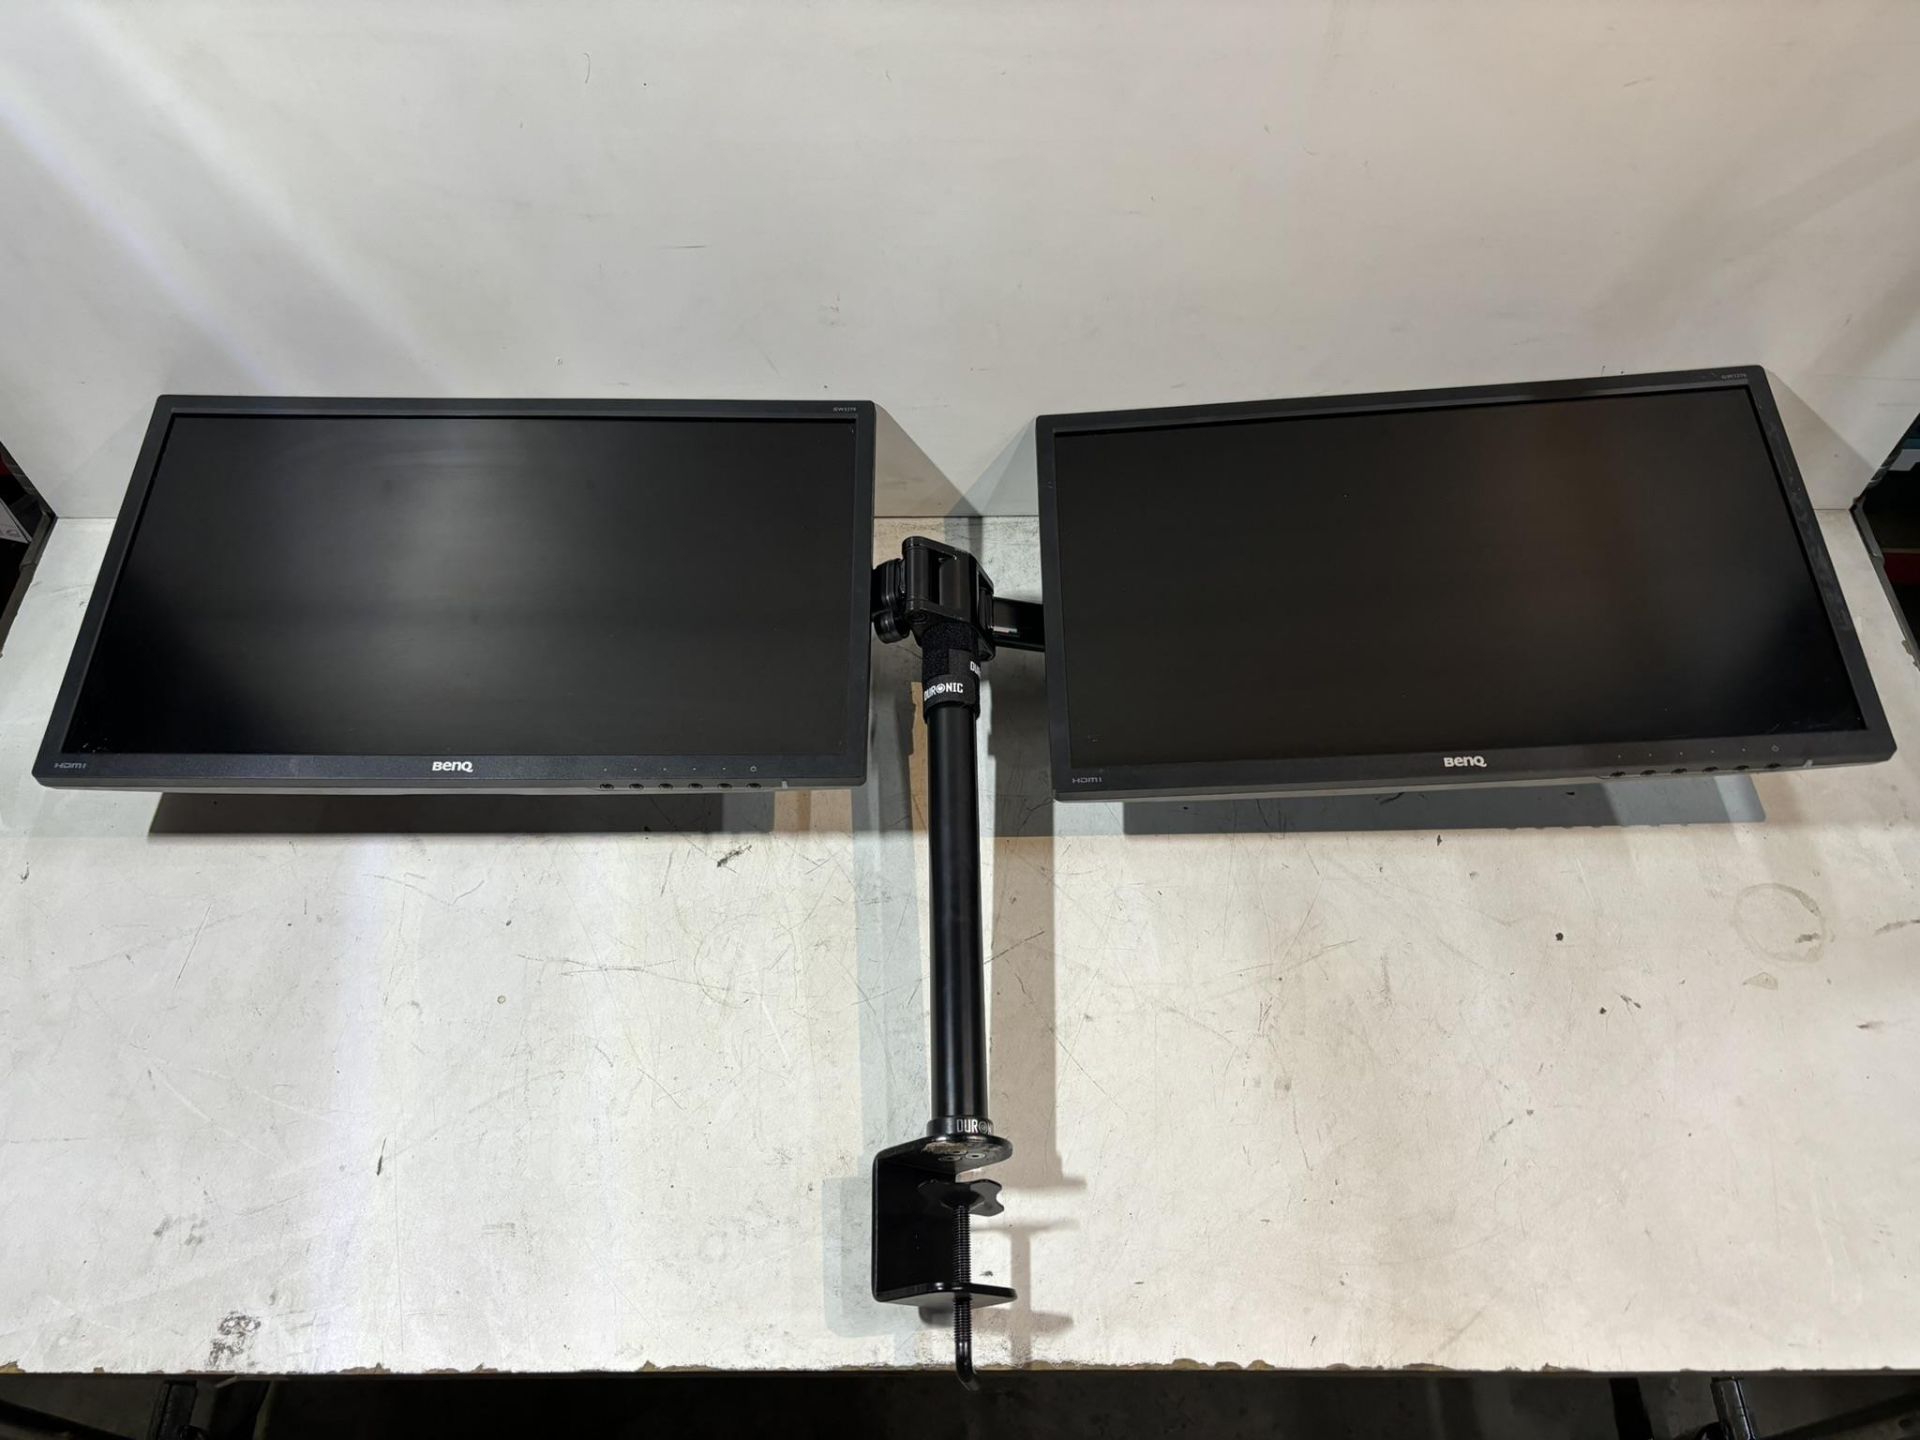 4 x BenQ Gw2270-B 21.5-inch LCD Monitors With Dual Monitor Stands - Image 6 of 10